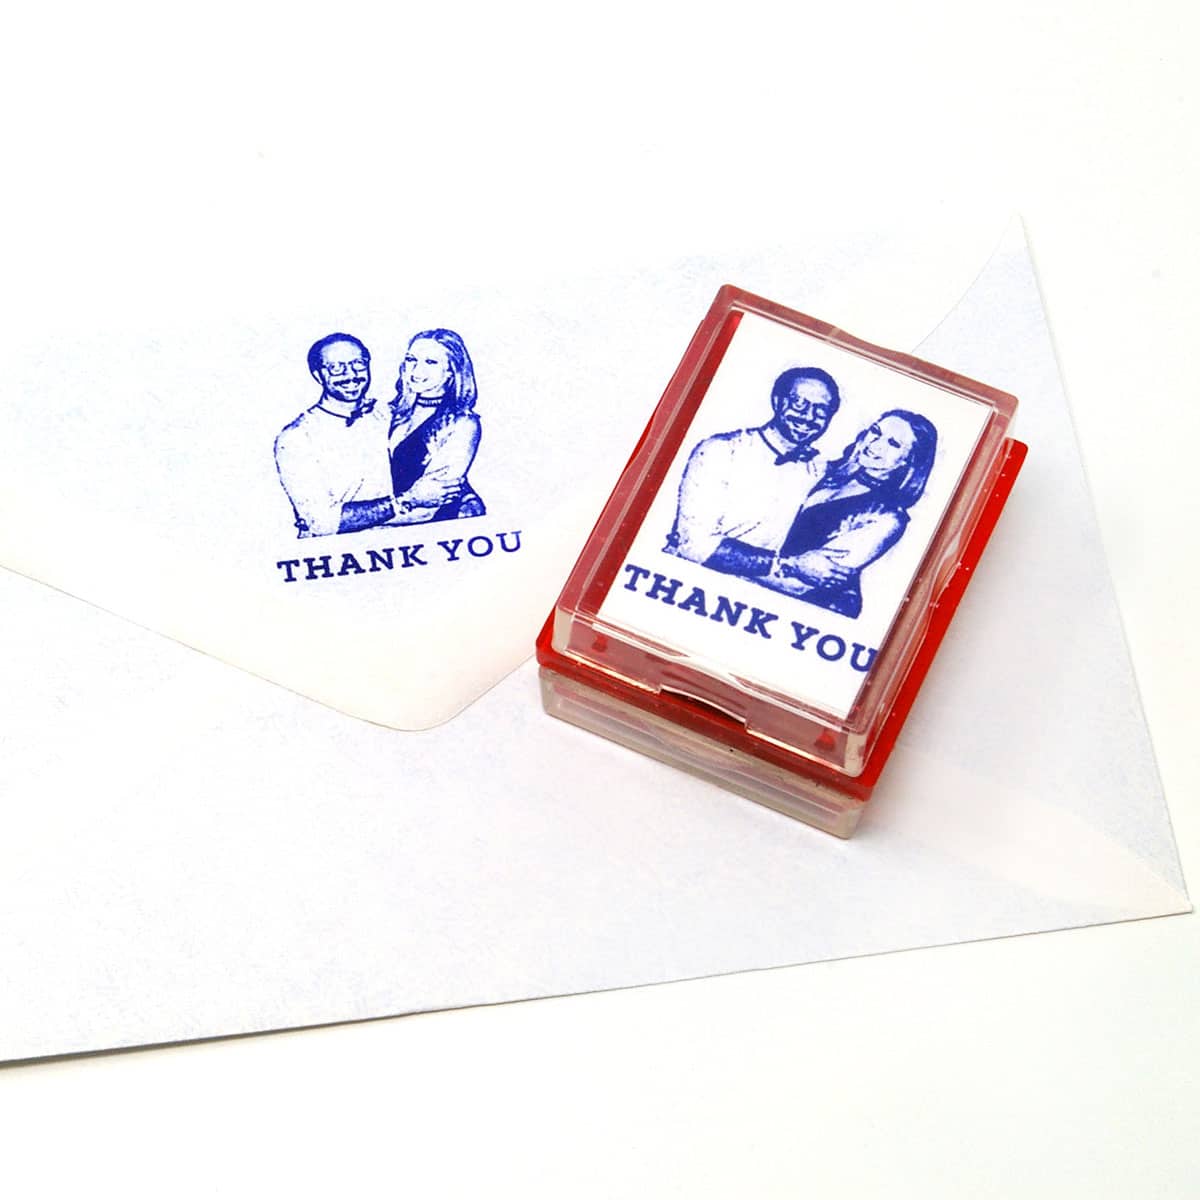 Thank you rubber stamp